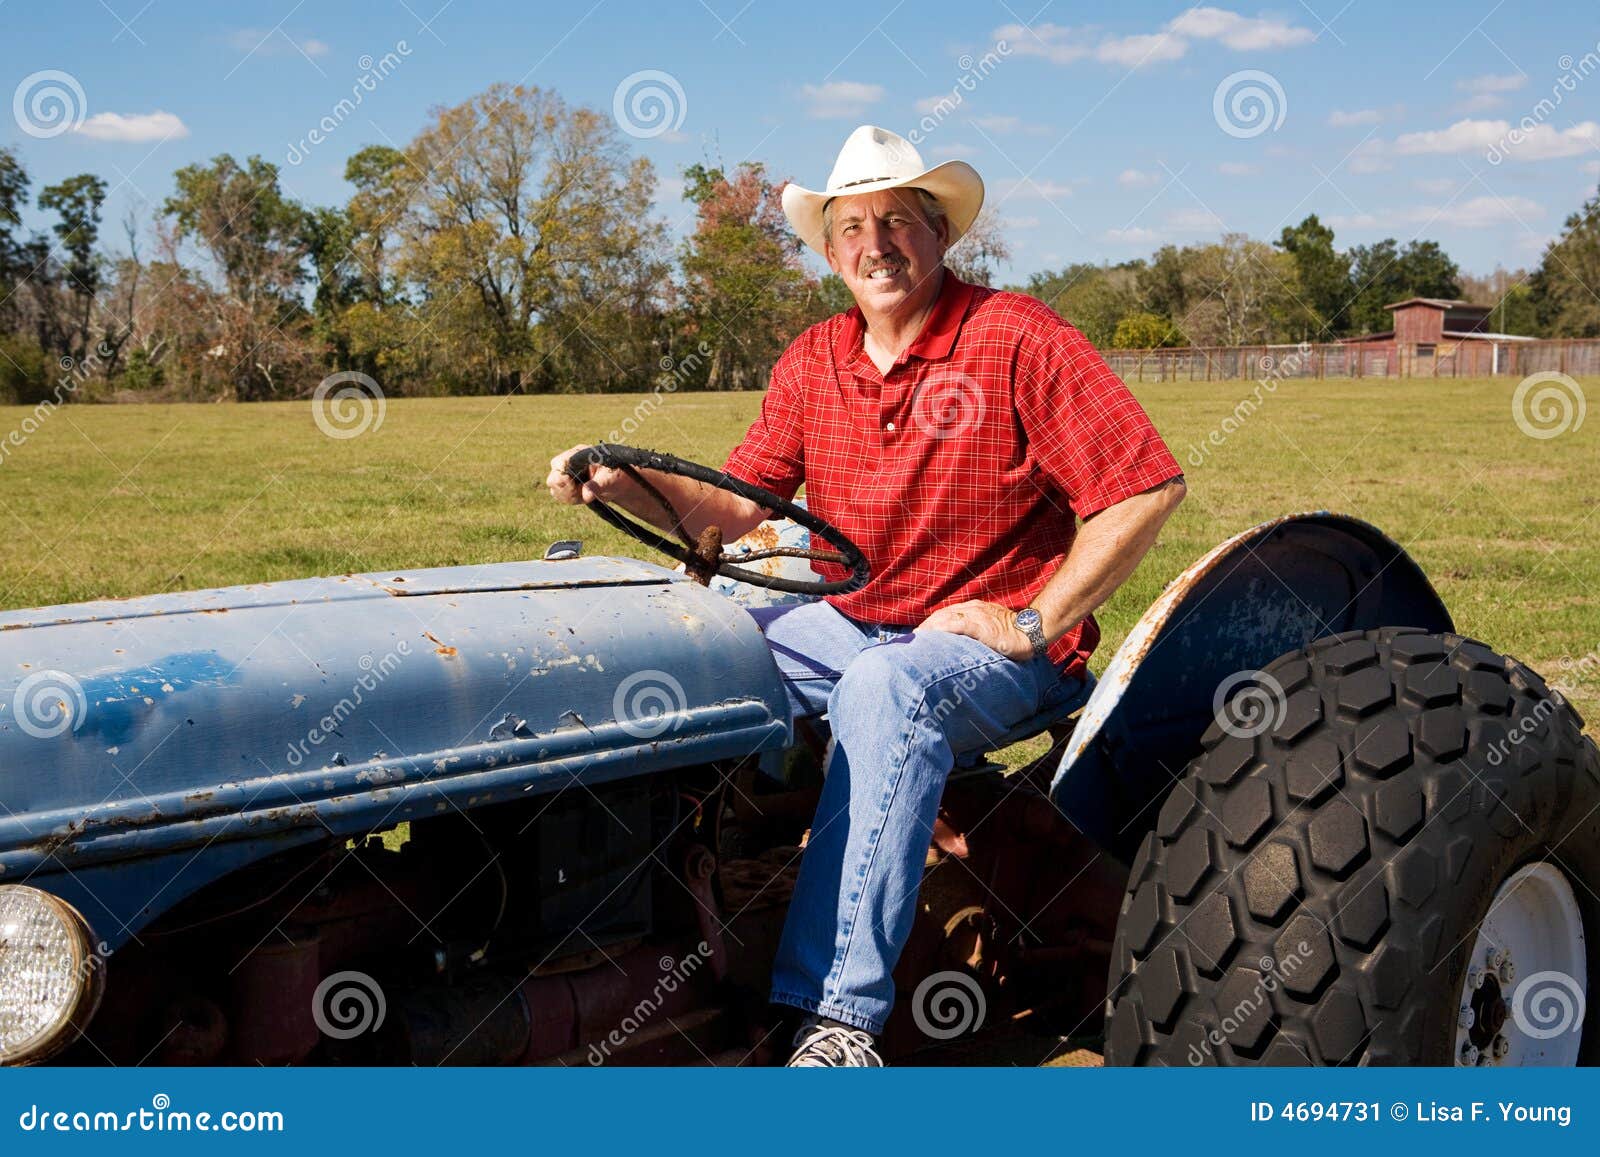 rancher on tractor